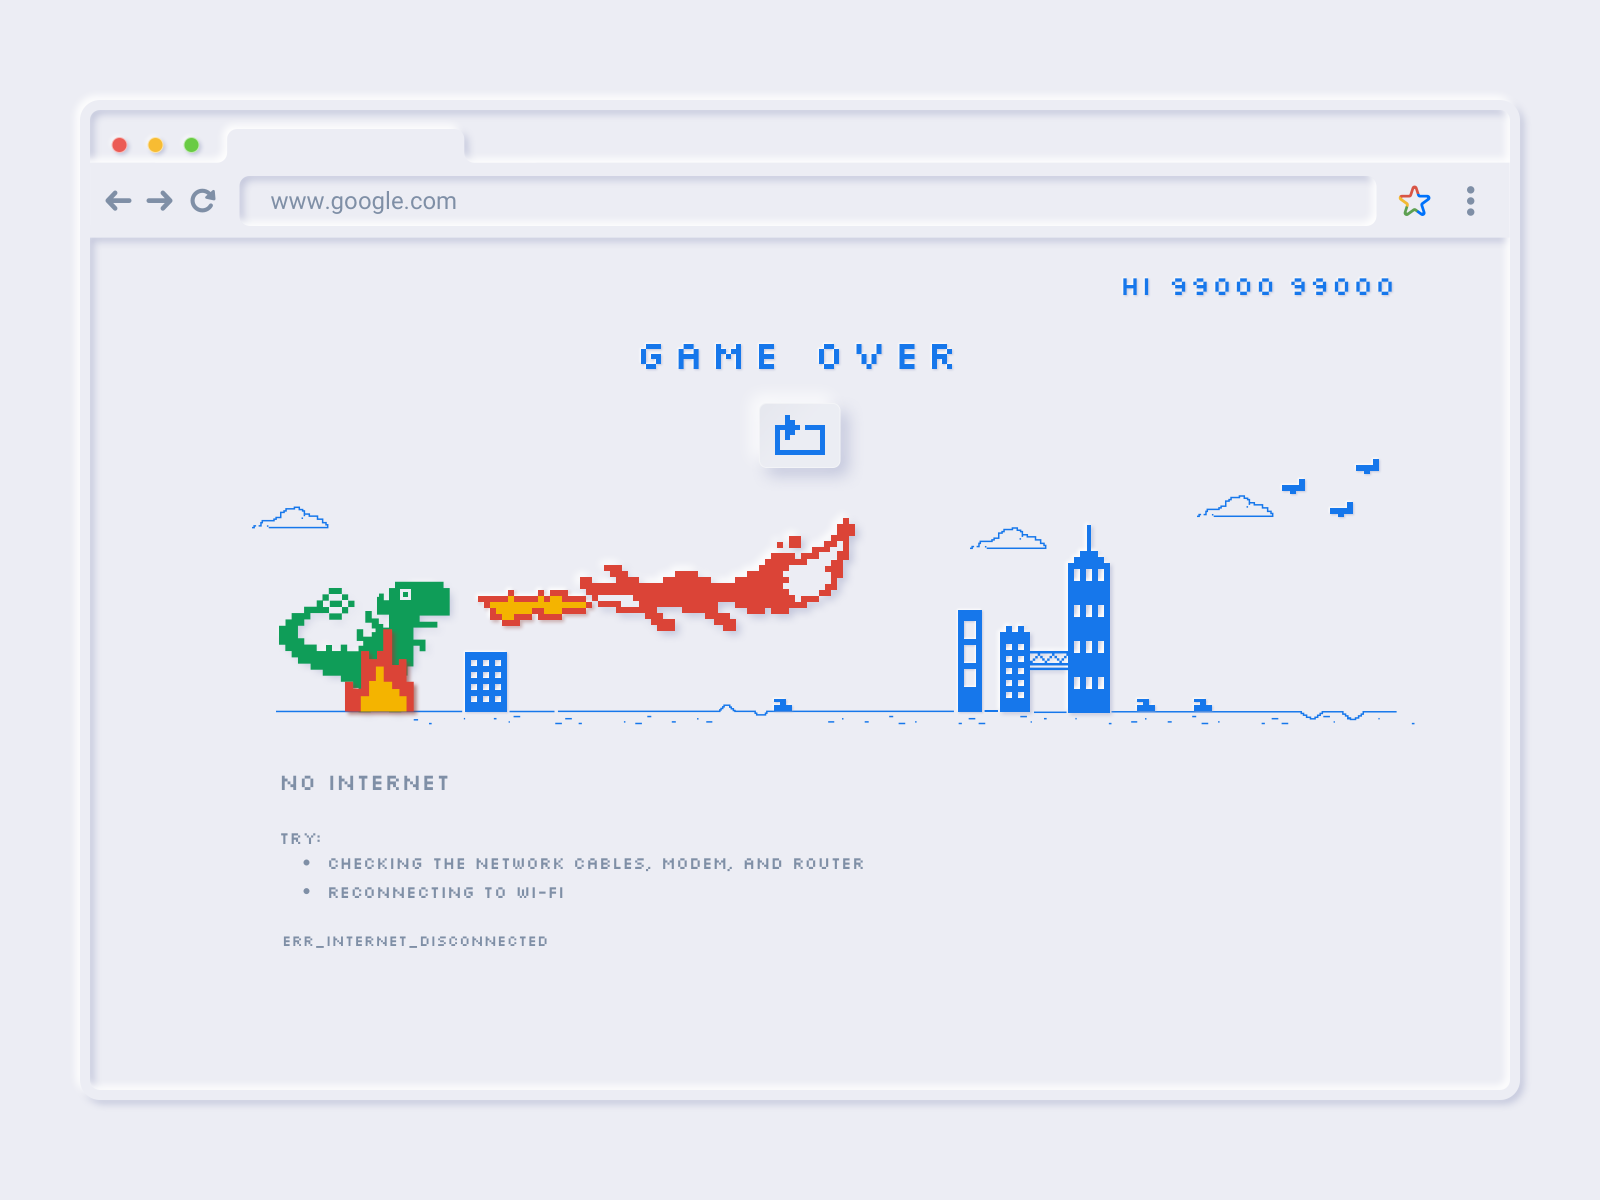 How to become invincible in the dinosaur game on Google Chrome? - SemBuse  Blog